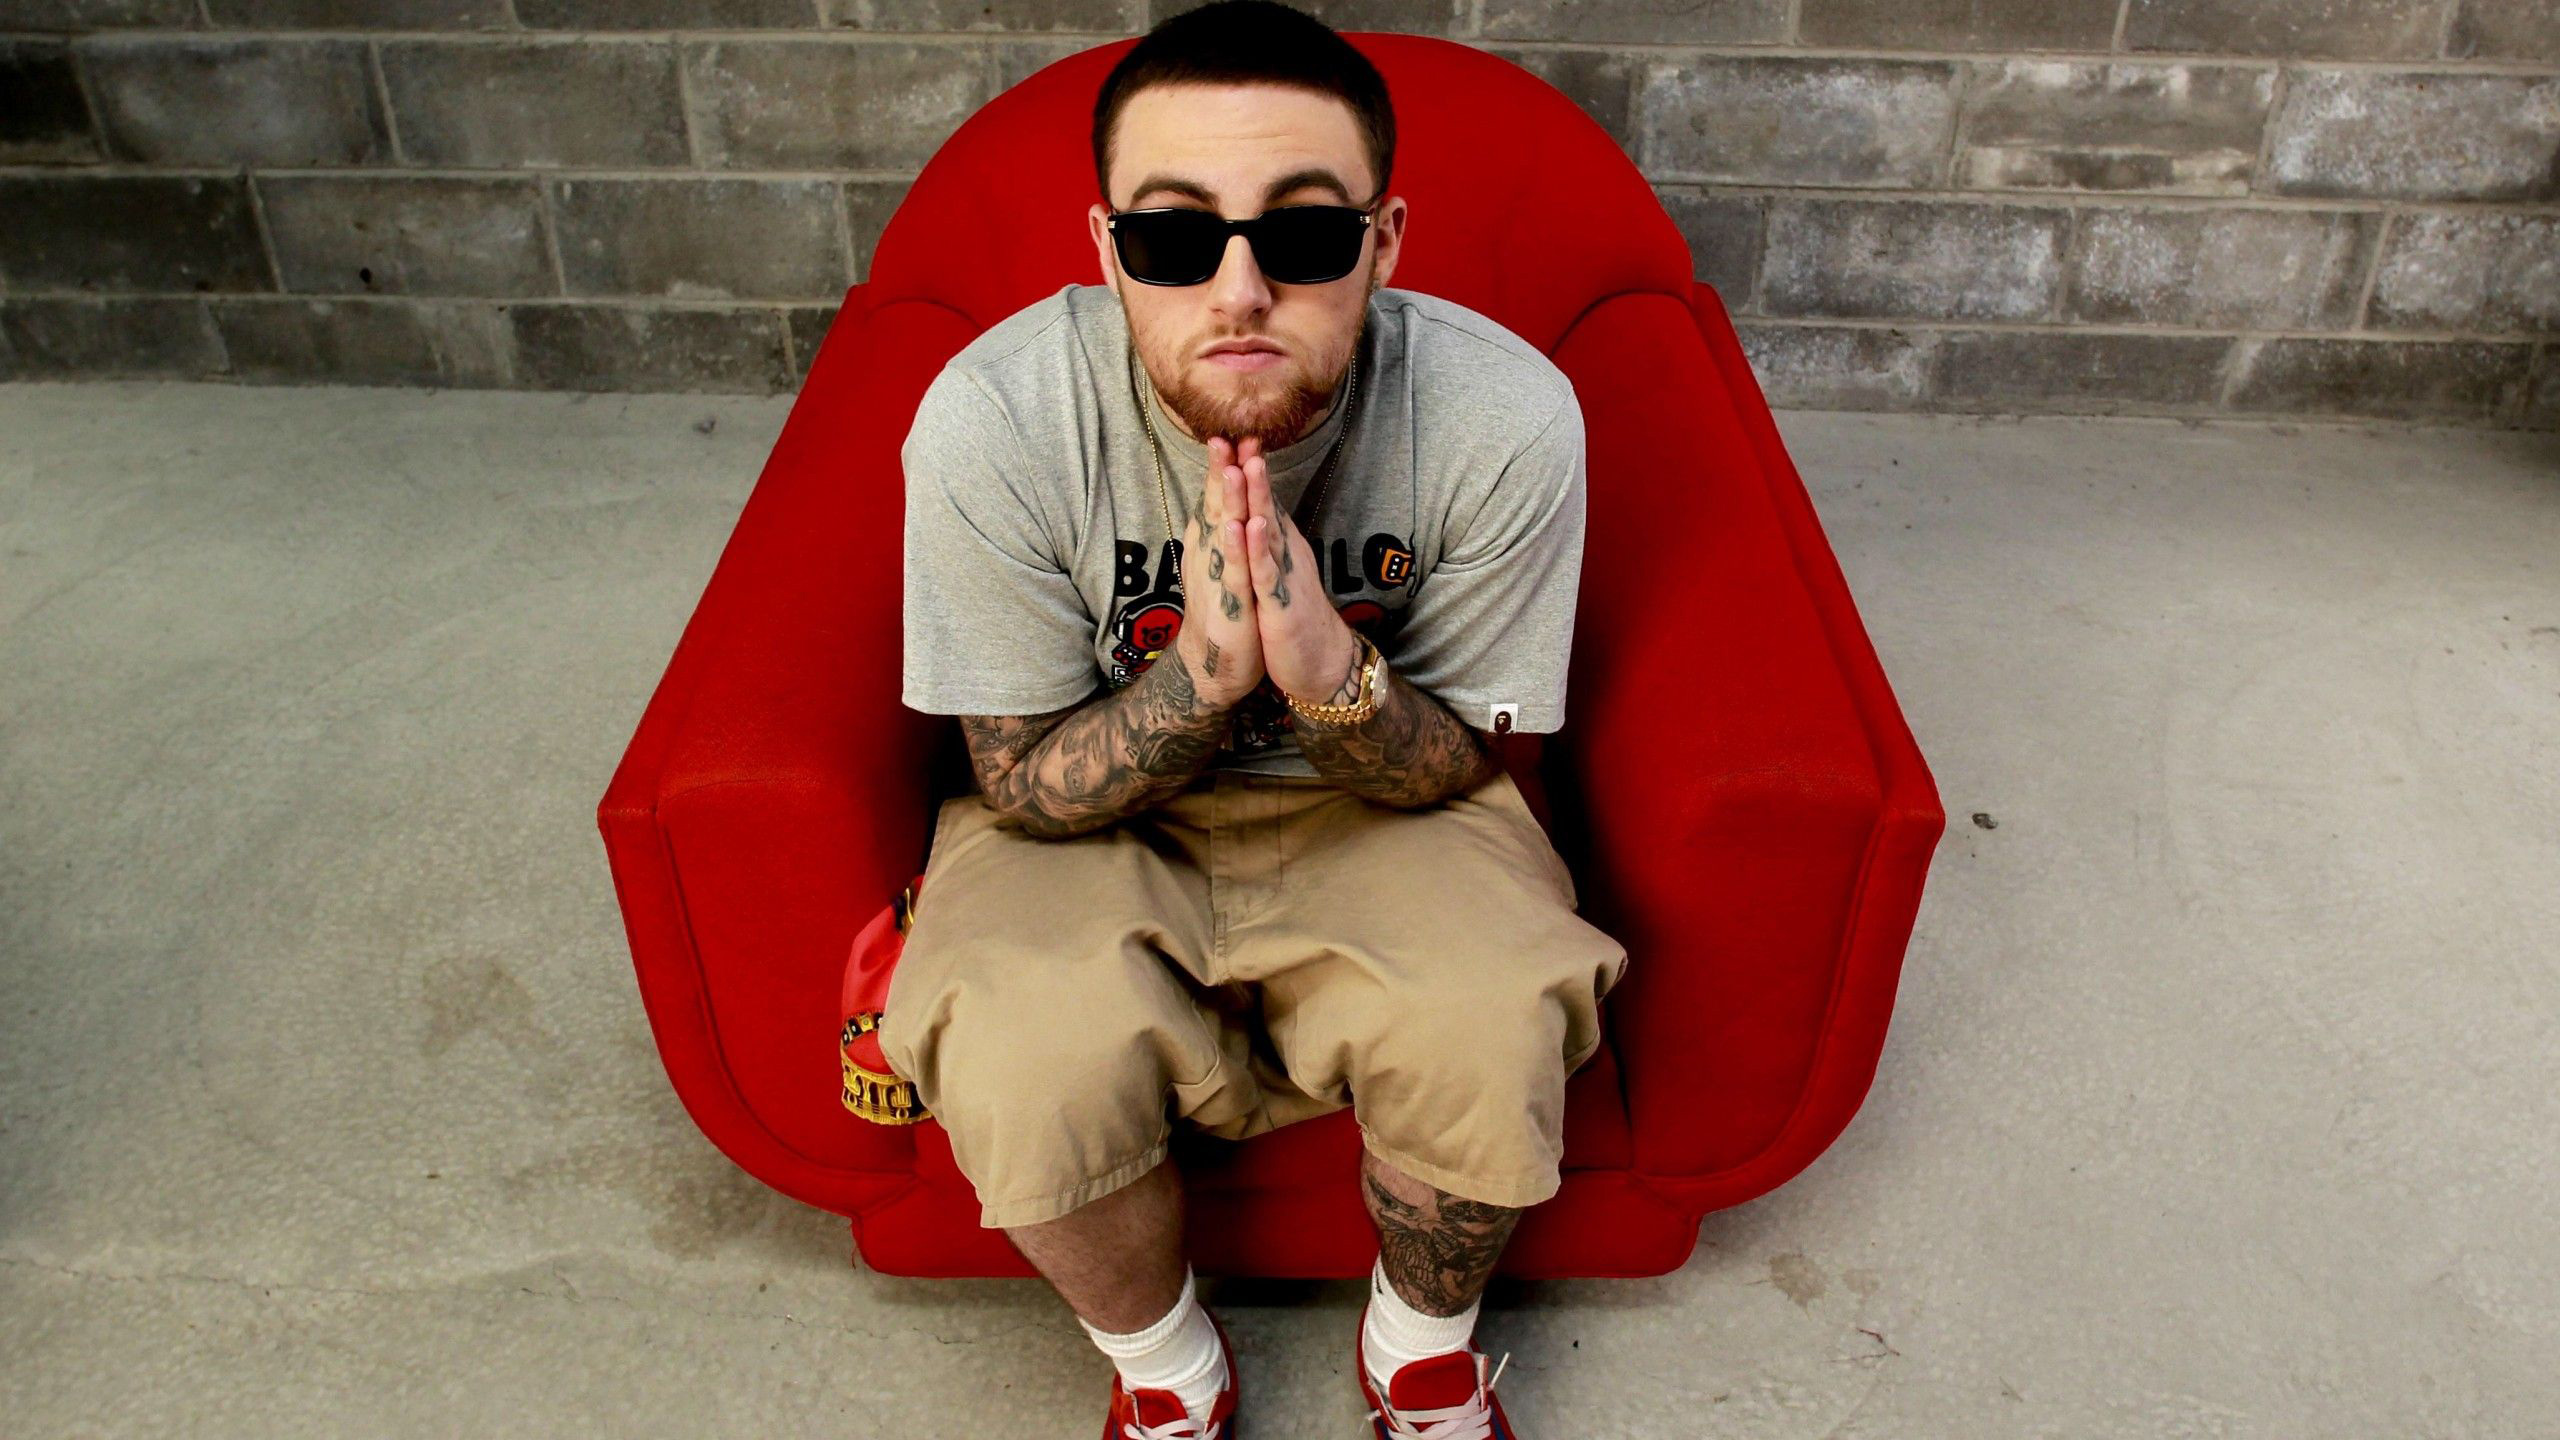 Mac Miller Is Sitting On a Red Couch Wearing Cap And Goggles 2K Celebrities